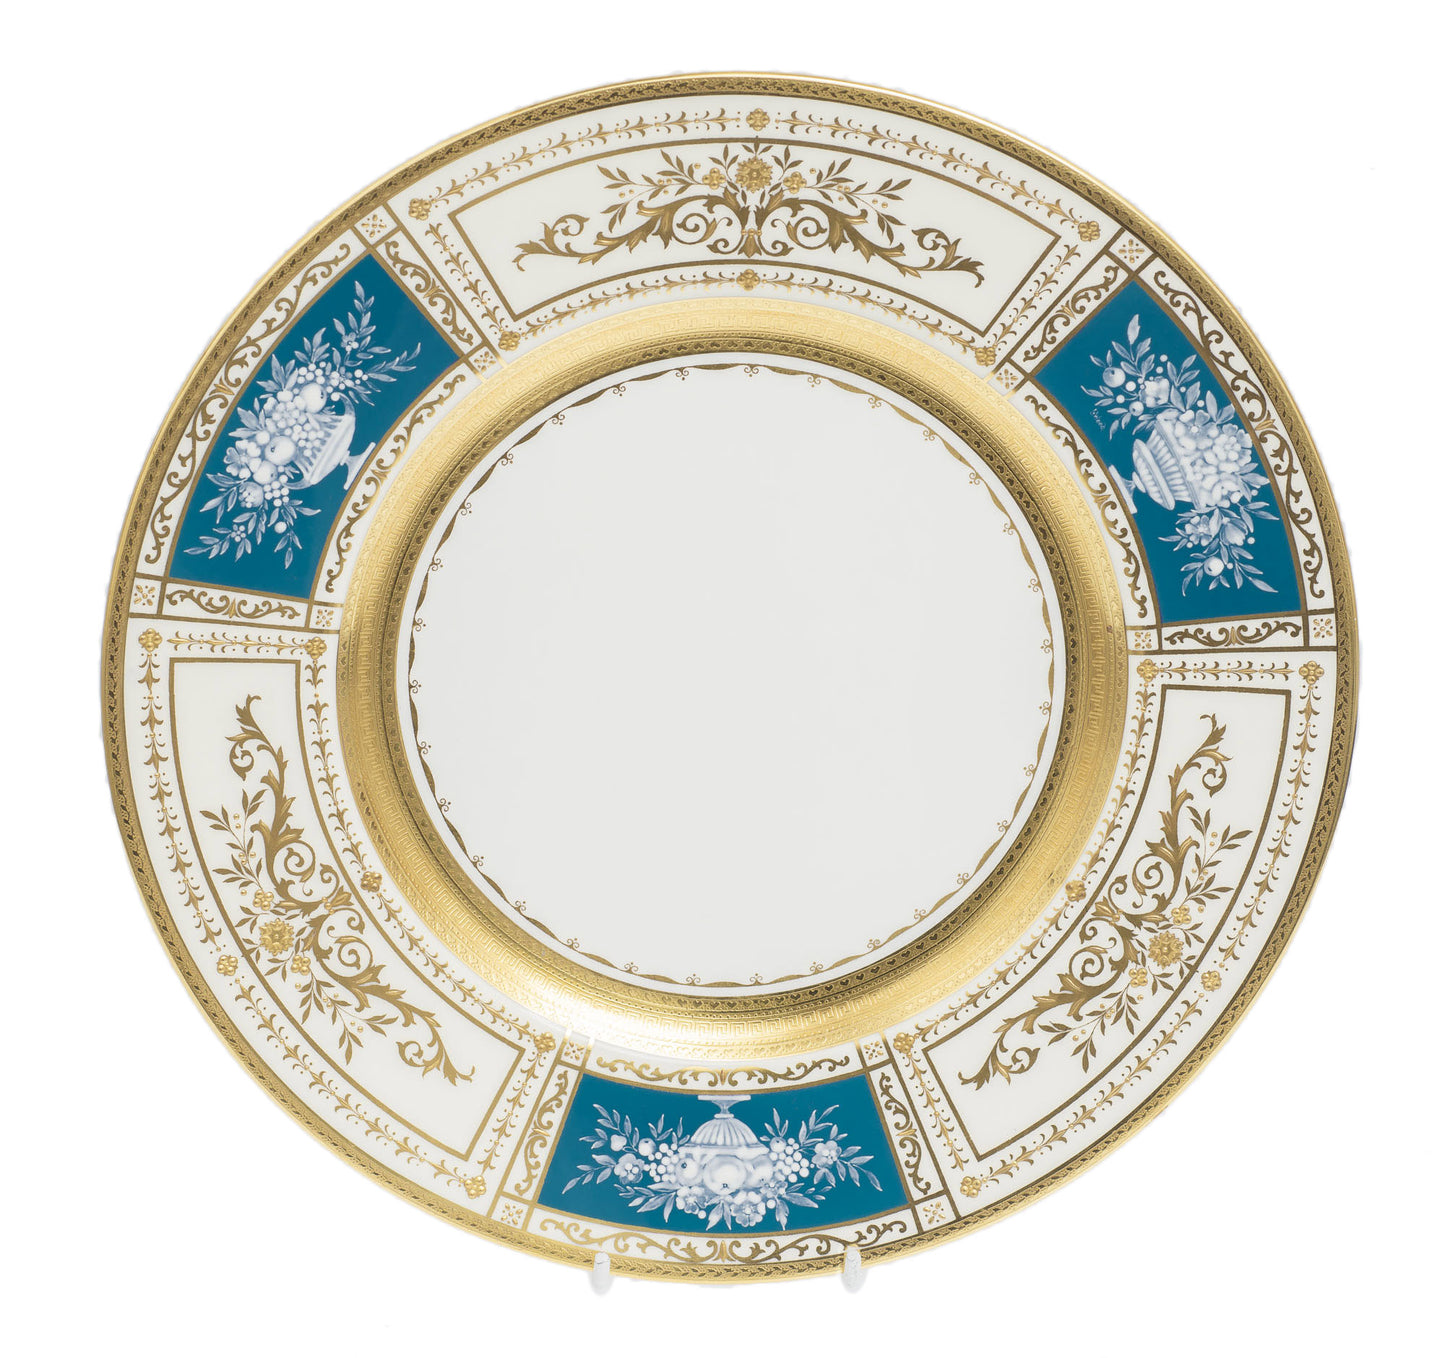 Minton Pate sur Pate Panel & Embossed Gold Dinner Plate - Signed L Wood (2916)